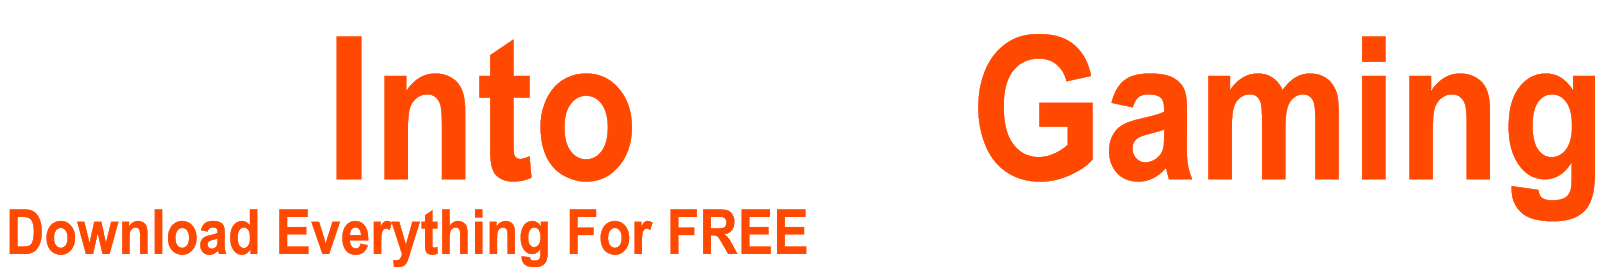 Get Into PC Gaming - Download Everything For FREE